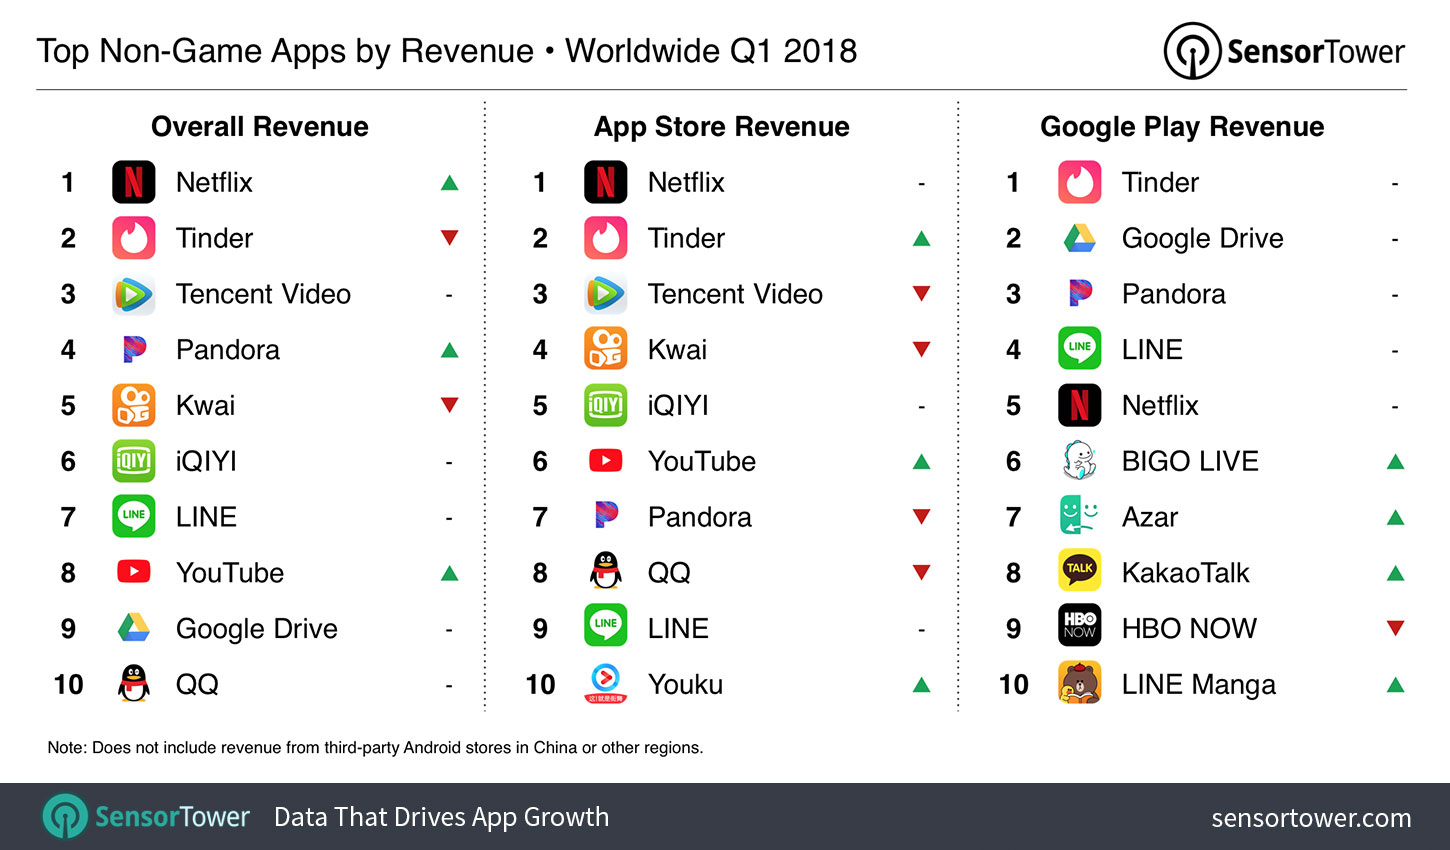 Chart showing the world's highest grossing iOS and Google Play apps for Q1 2018